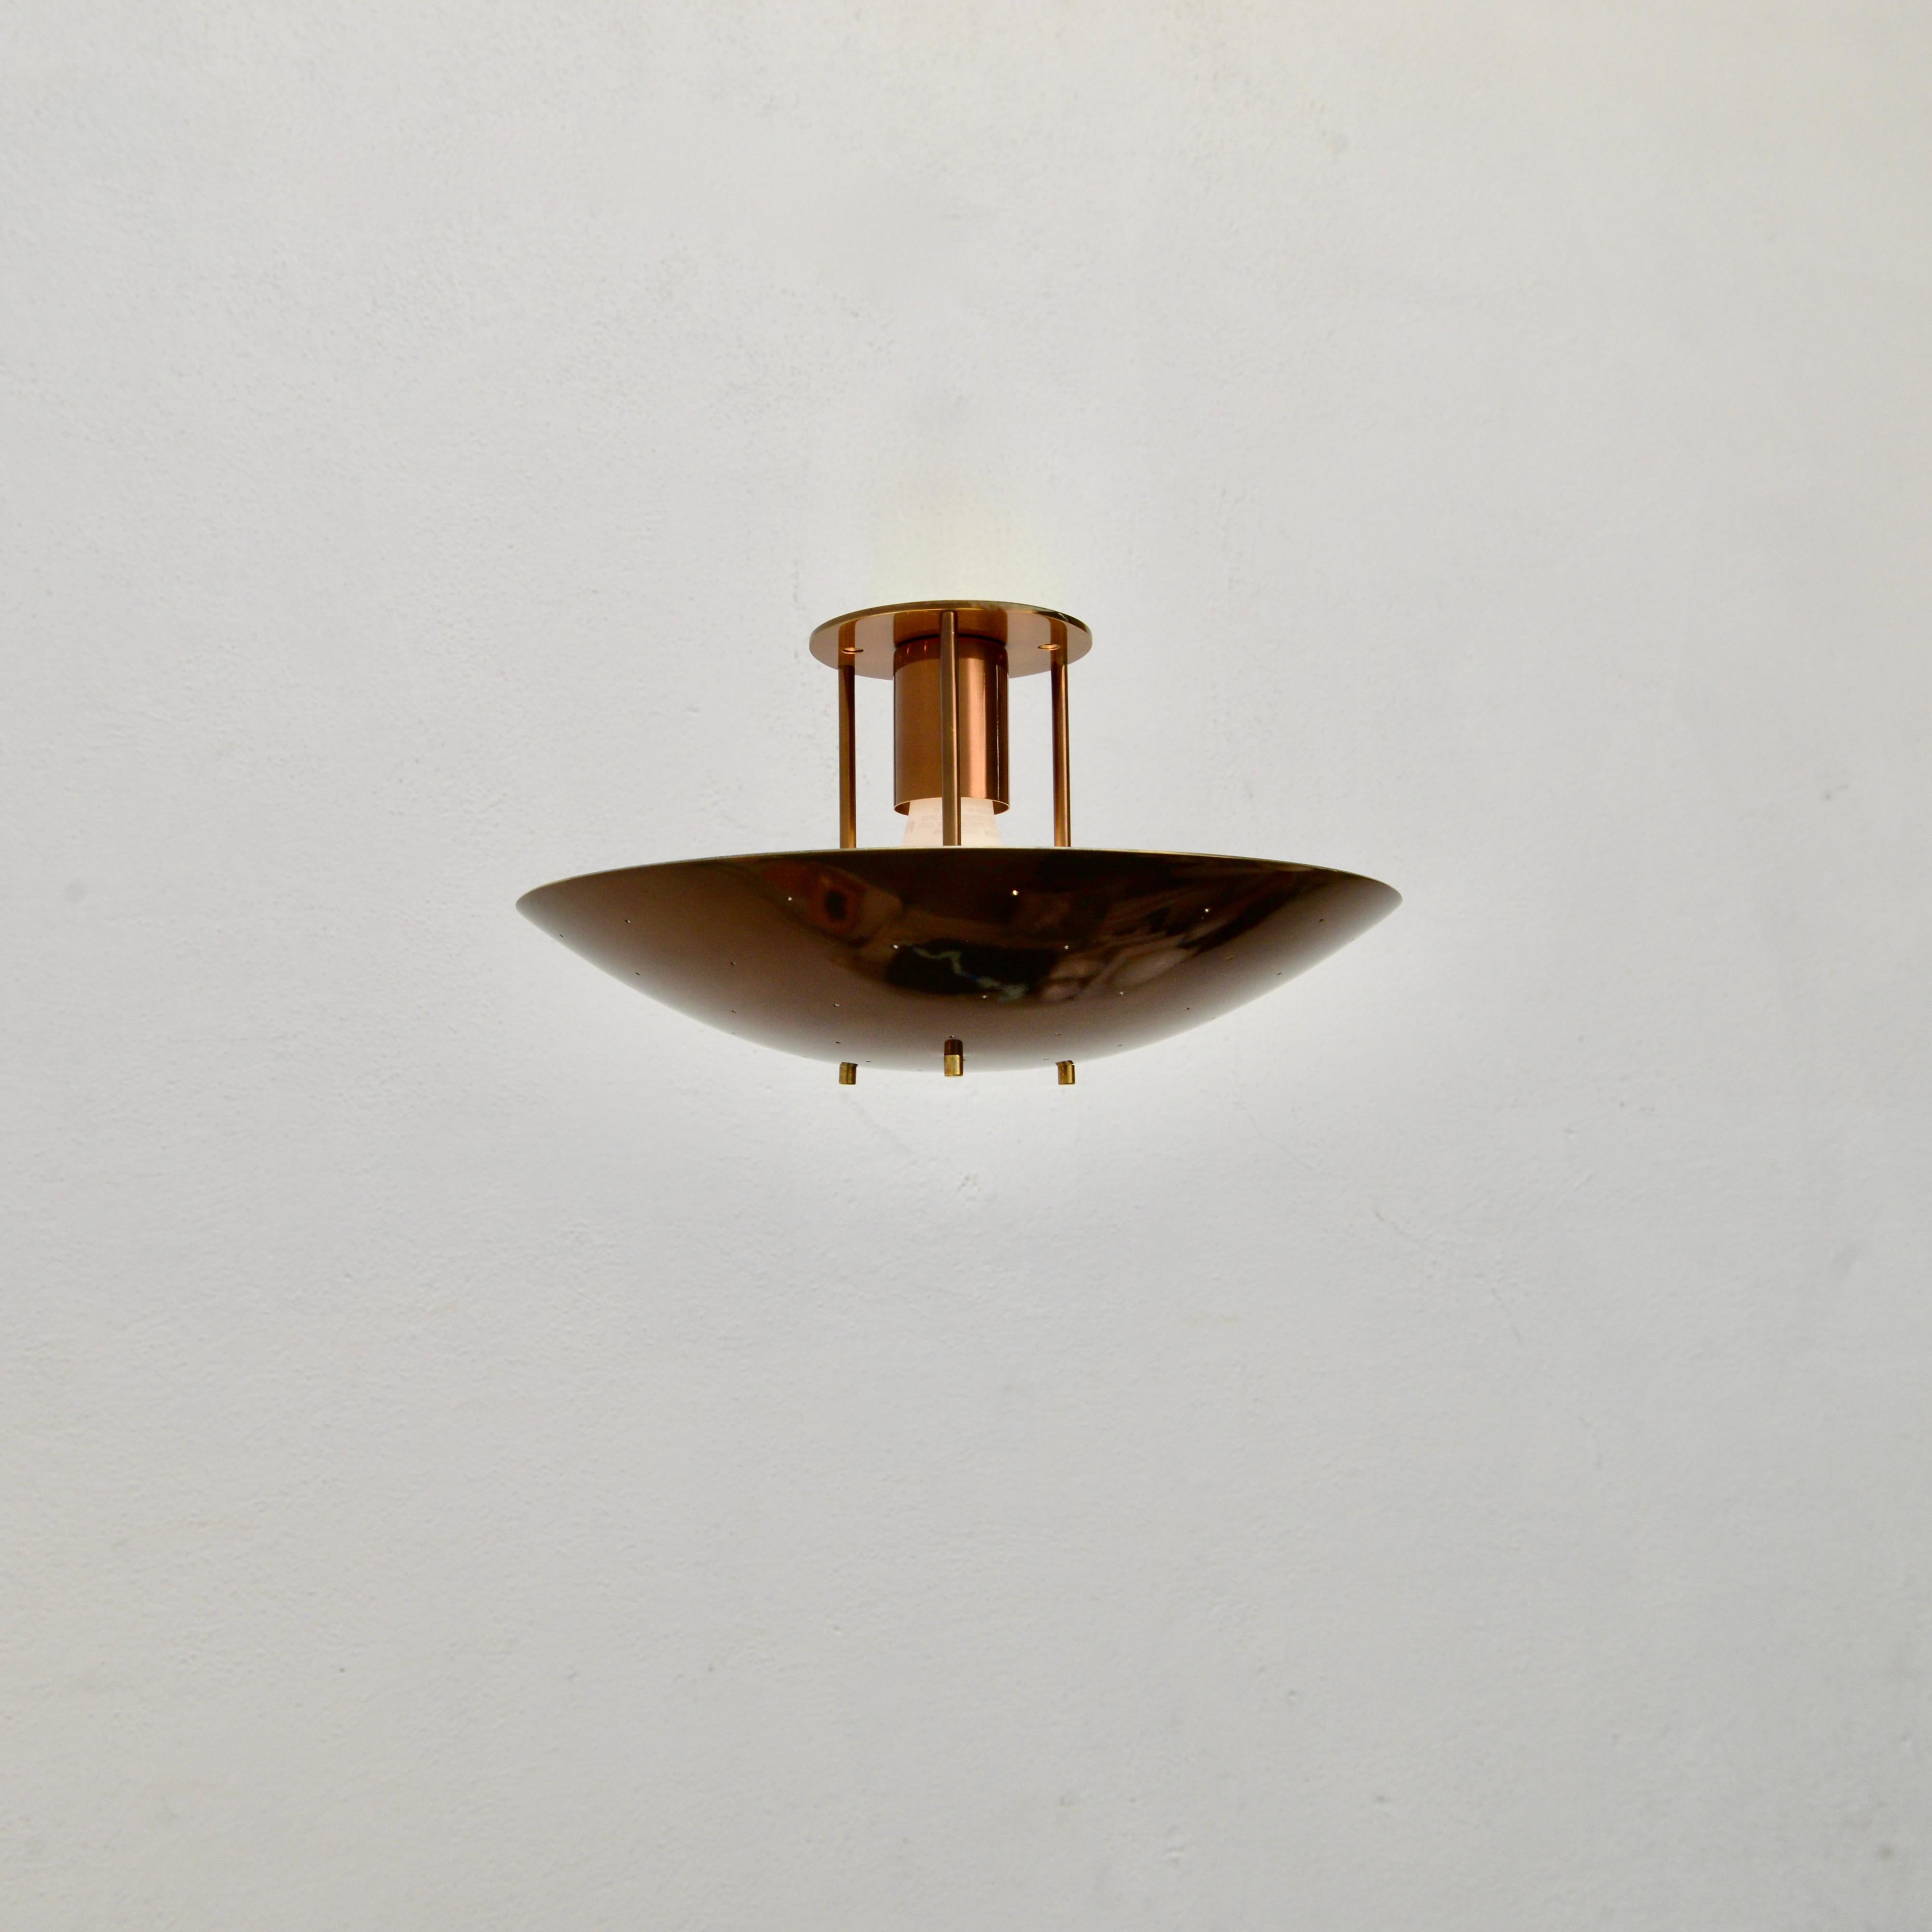 Petite LUsaucer Brass Fixture by Lumfardo Luminaires In New Condition For Sale In Los Angeles, CA